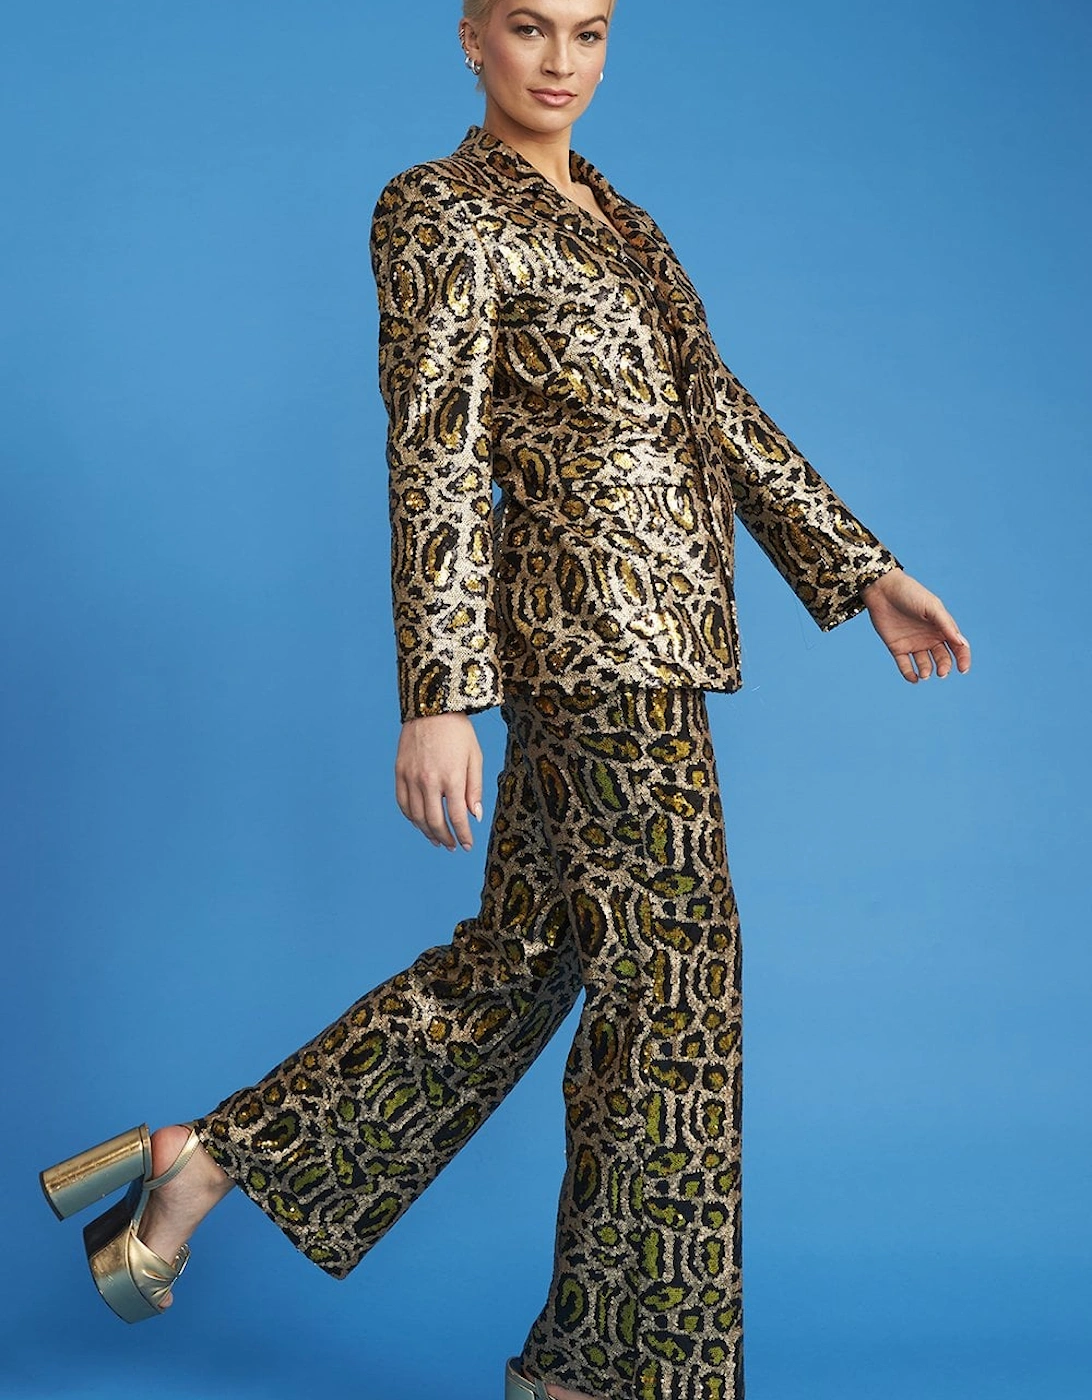 Gold Animal Print Sequin Trousers